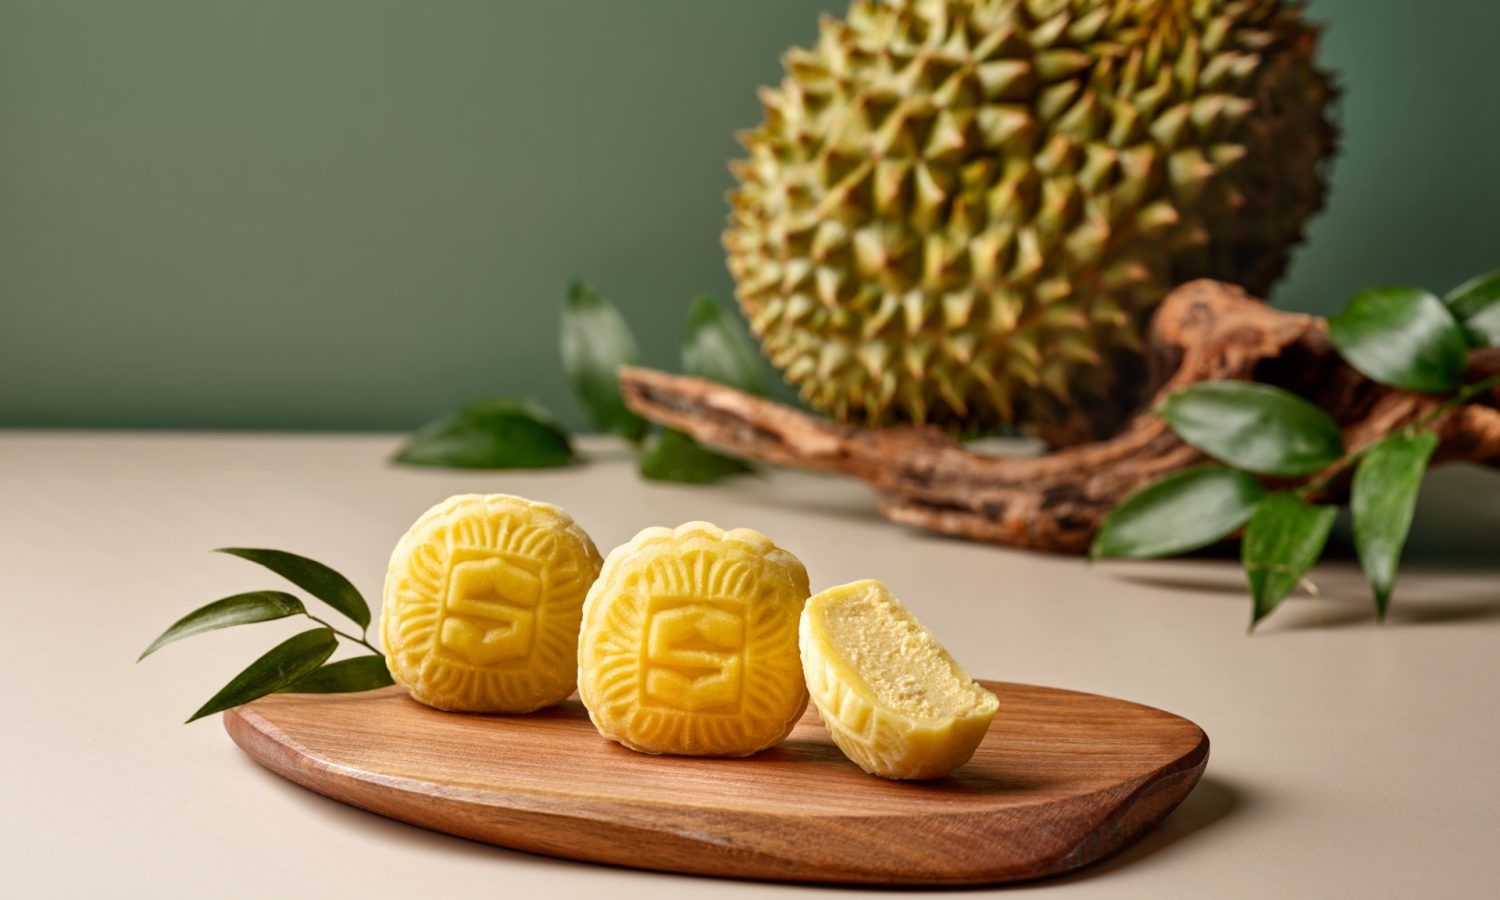 The Best Mooncakes To Enjoy This Mid-Autumn Festival 2022